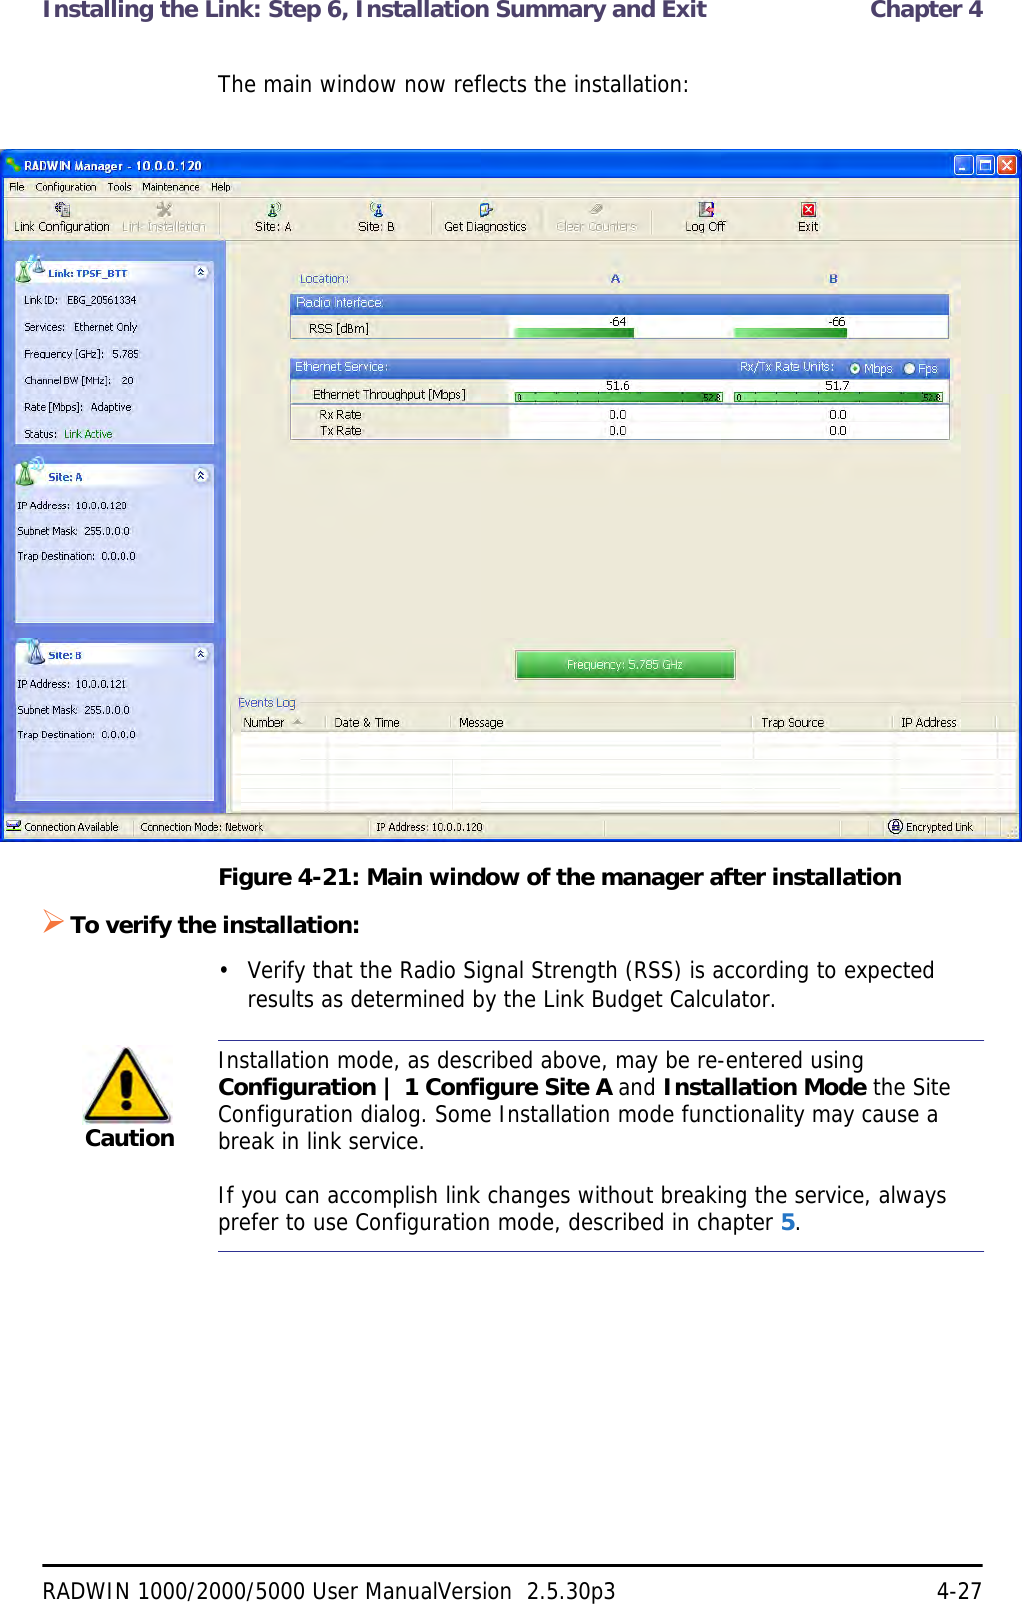 Installing the Link: Step 6, Installation Summary and Exit  Chapter 4RADWIN 1000/2000/5000 User ManualVersion  2.5.30p3 4-27The main window now reflects the installation:Figure 4-21: Main window of the manager after installation To verify the installation:• Verify that the Radio Signal Strength (RSS) is according to expected results as determined by the Link Budget Calculator.CautionInstallation mode, as described above, may be re-entered using Configuration | 1 Configure Site A and Installation Mode the Site Configuration dialog. Some Installation mode functionality may cause a break in link service.If you can accomplish link changes without breaking the service, always prefer to use Configuration mode, described in chapter 5. 